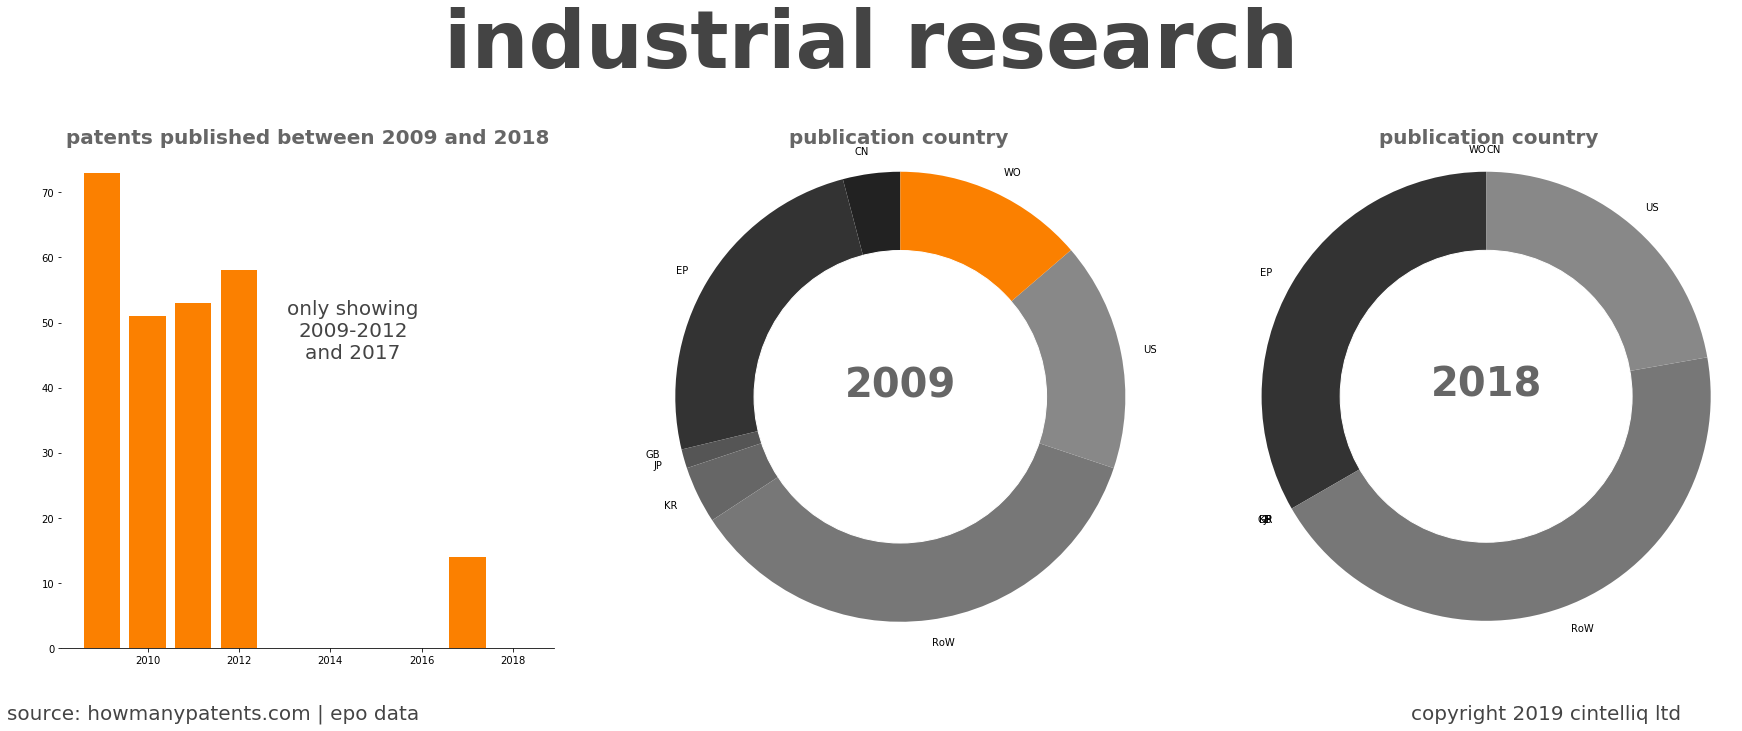 summary of patents for Industrial Research